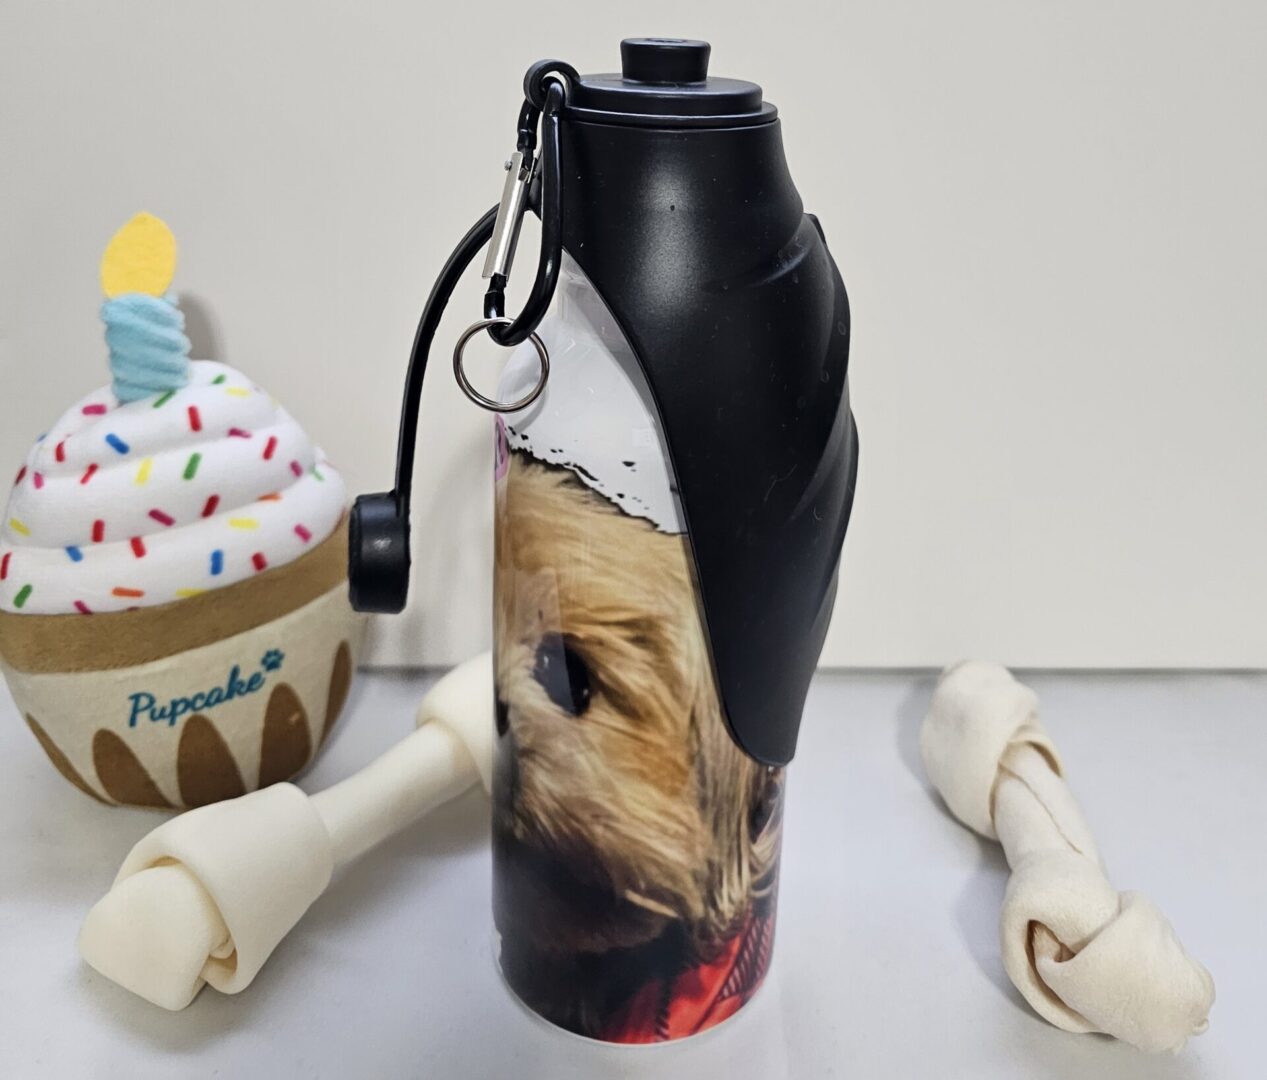 A 20 oz. Pet Water Bottle with an image of a dog on it, flanked by a plush cupcake toy and two rawhide bones.